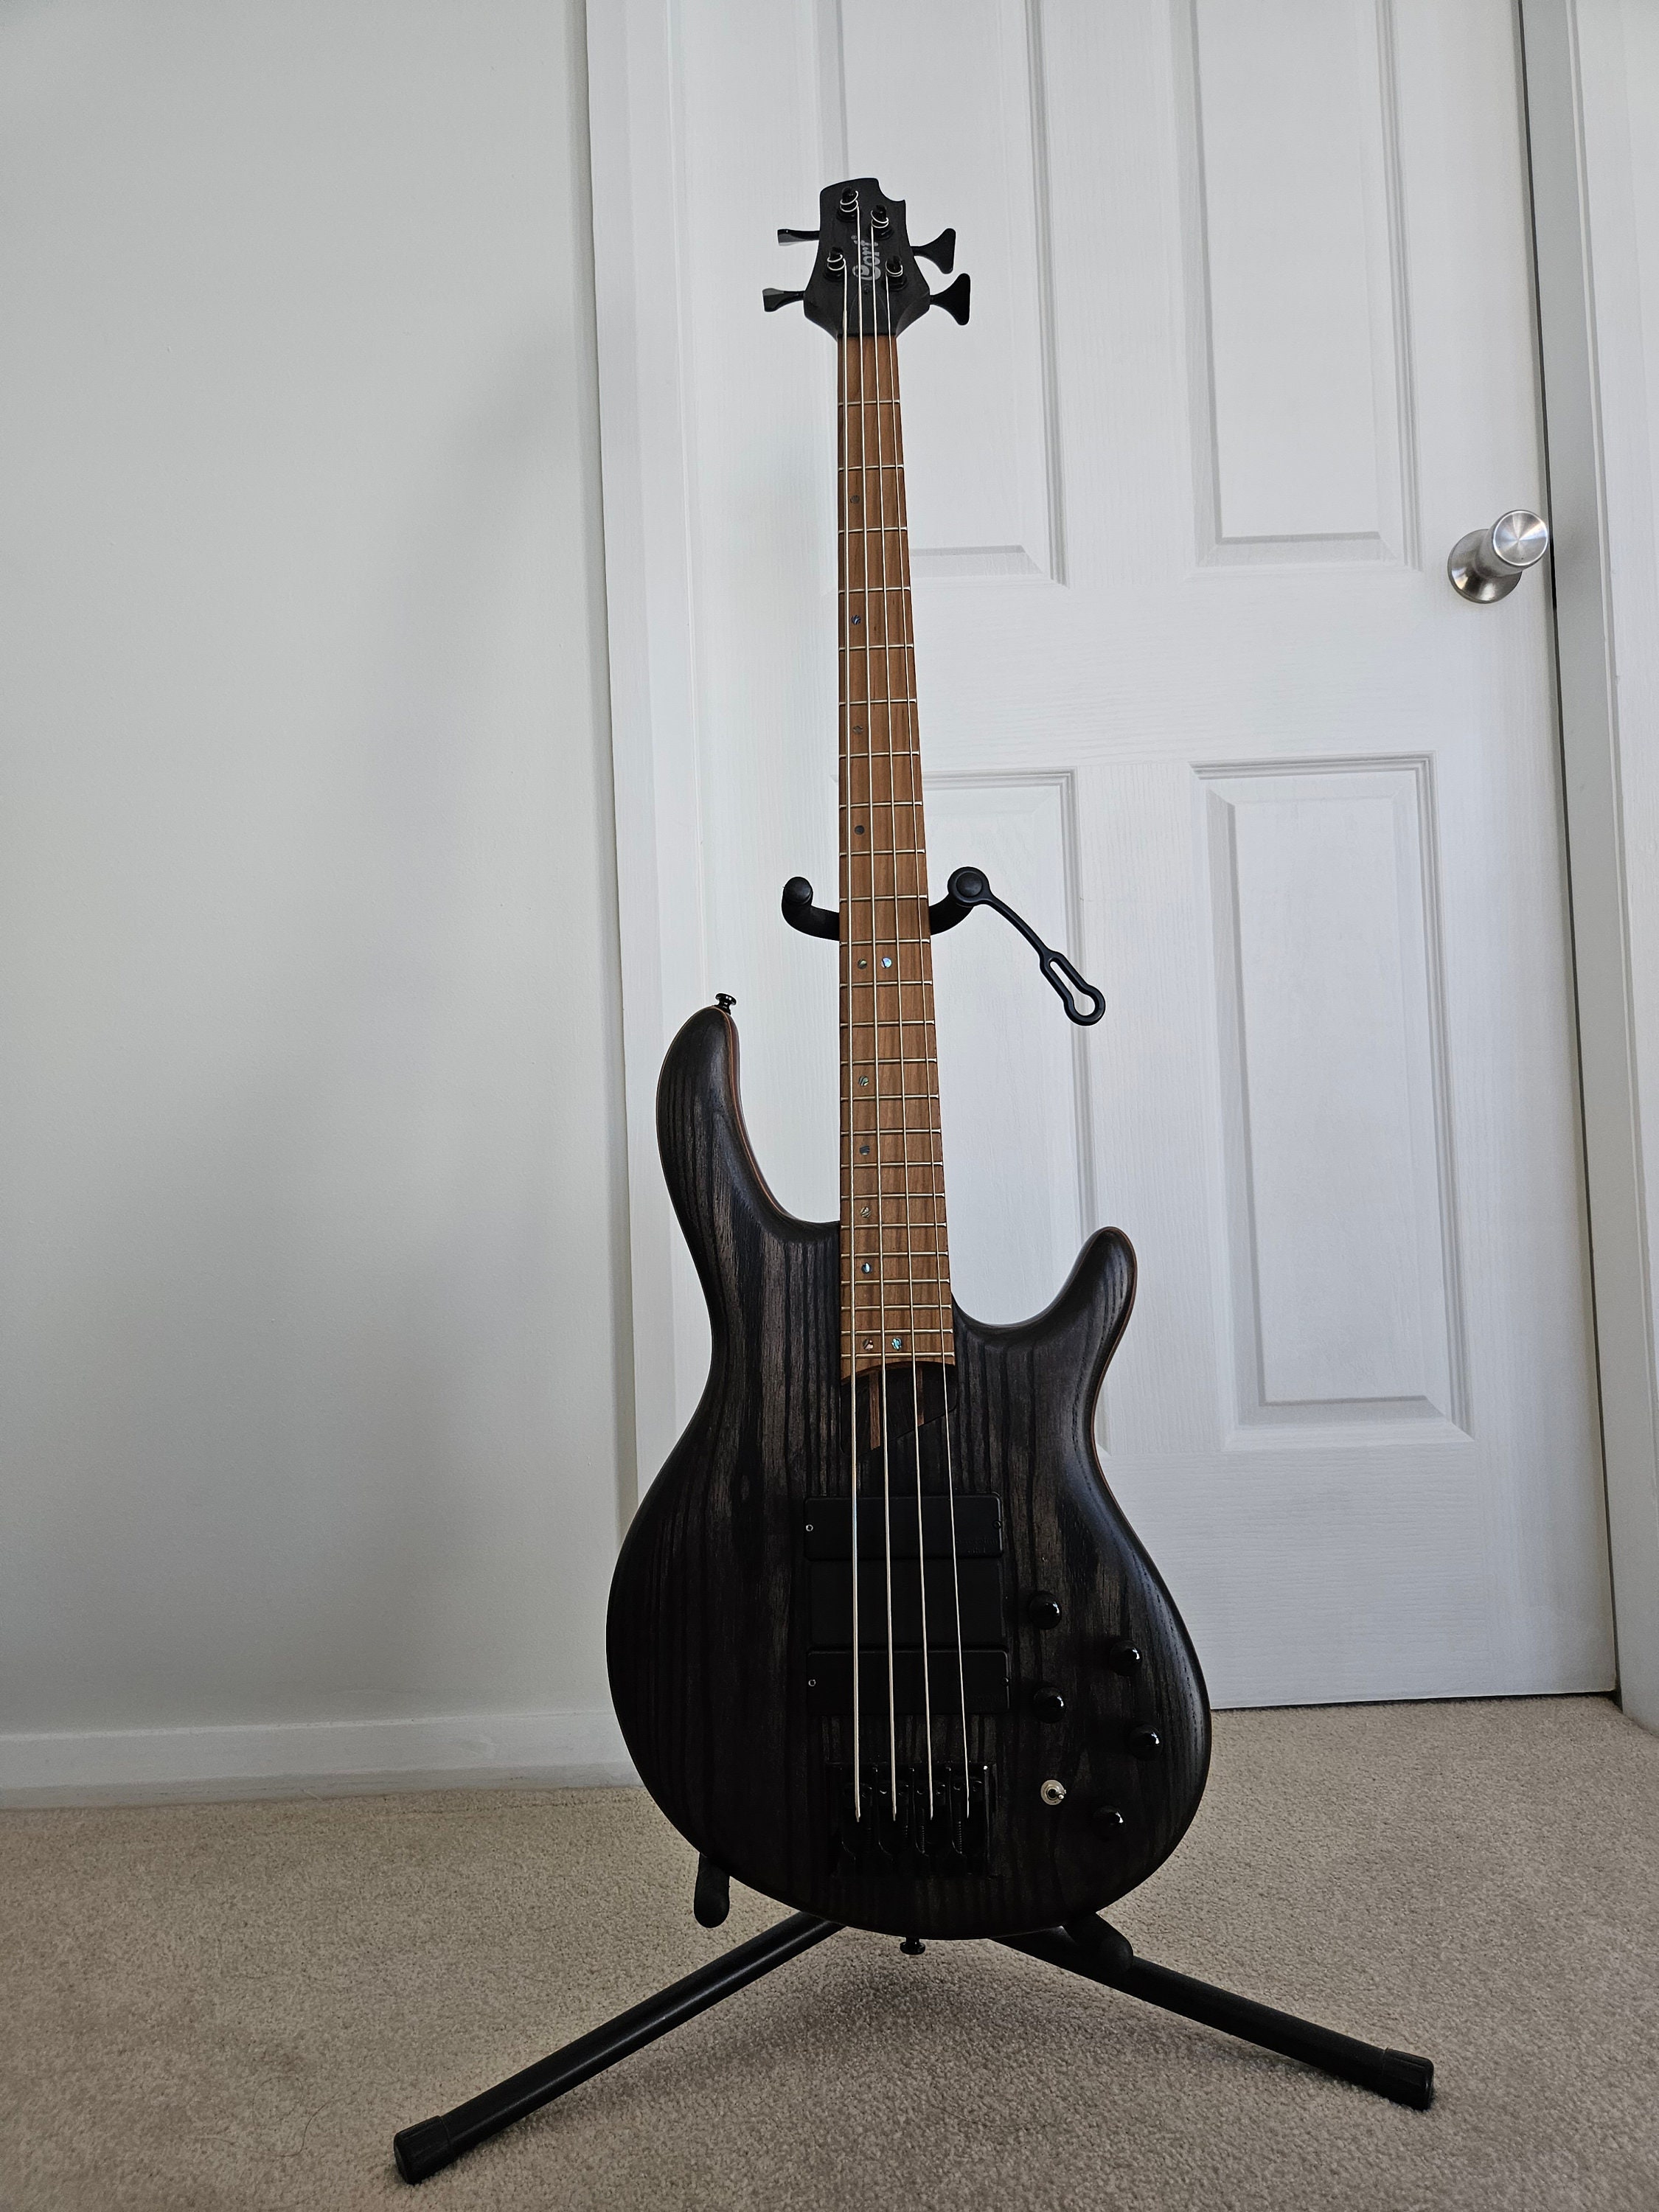 Buy Bass Guitar Kit Online In India -  India